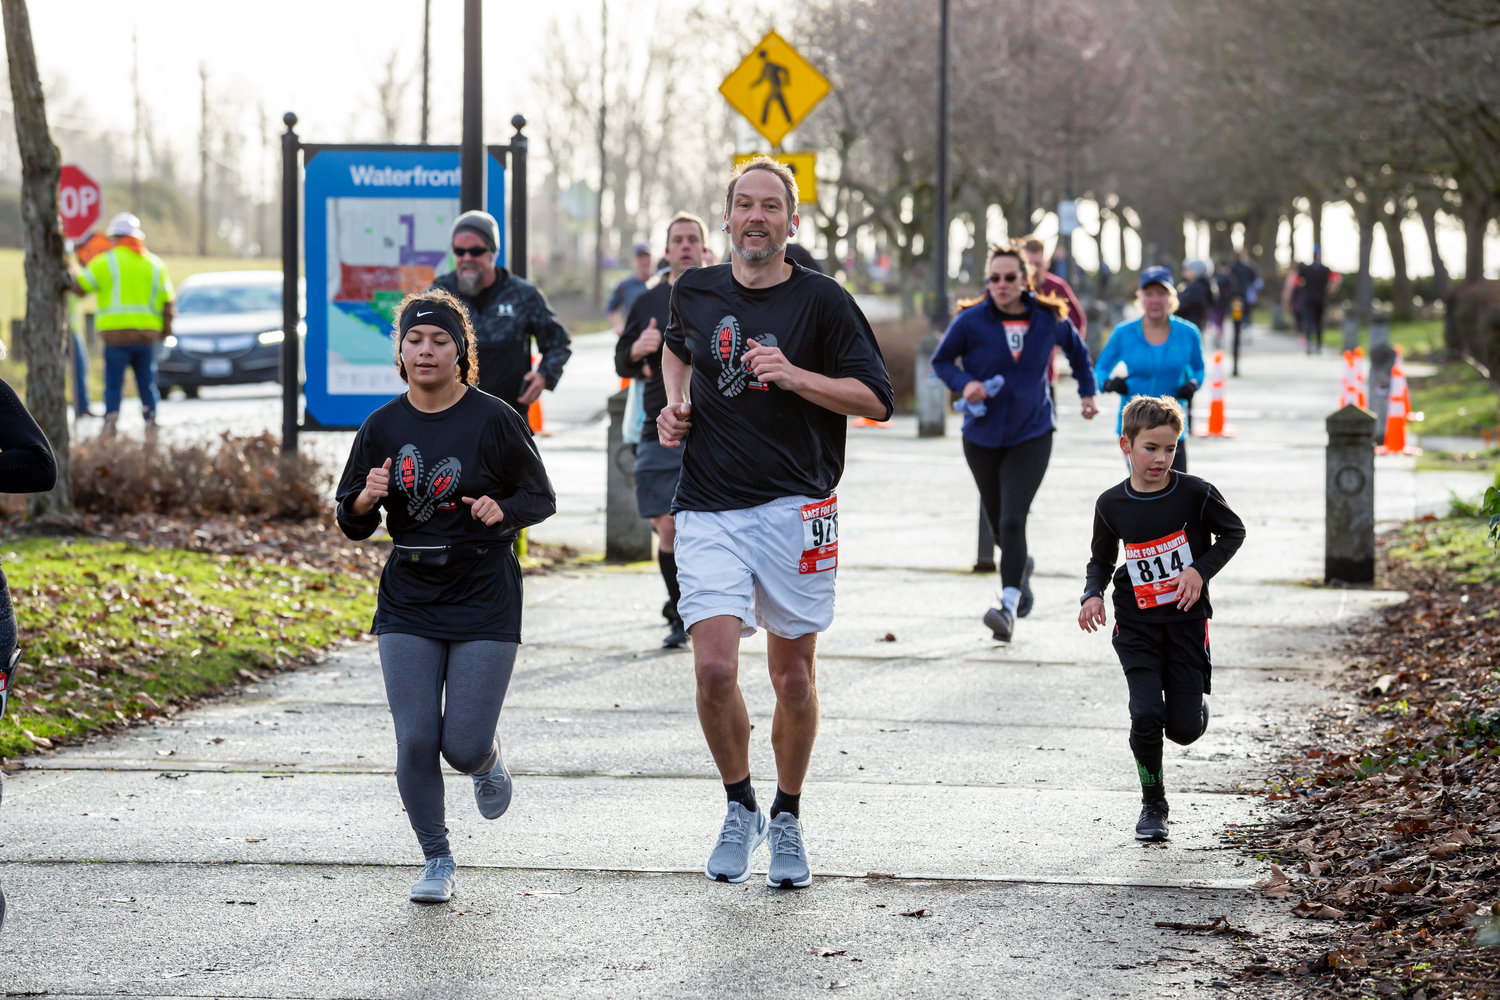 Families and competitive runners alike can participate in the upcoming Race for Warmth. Photo from previous race.